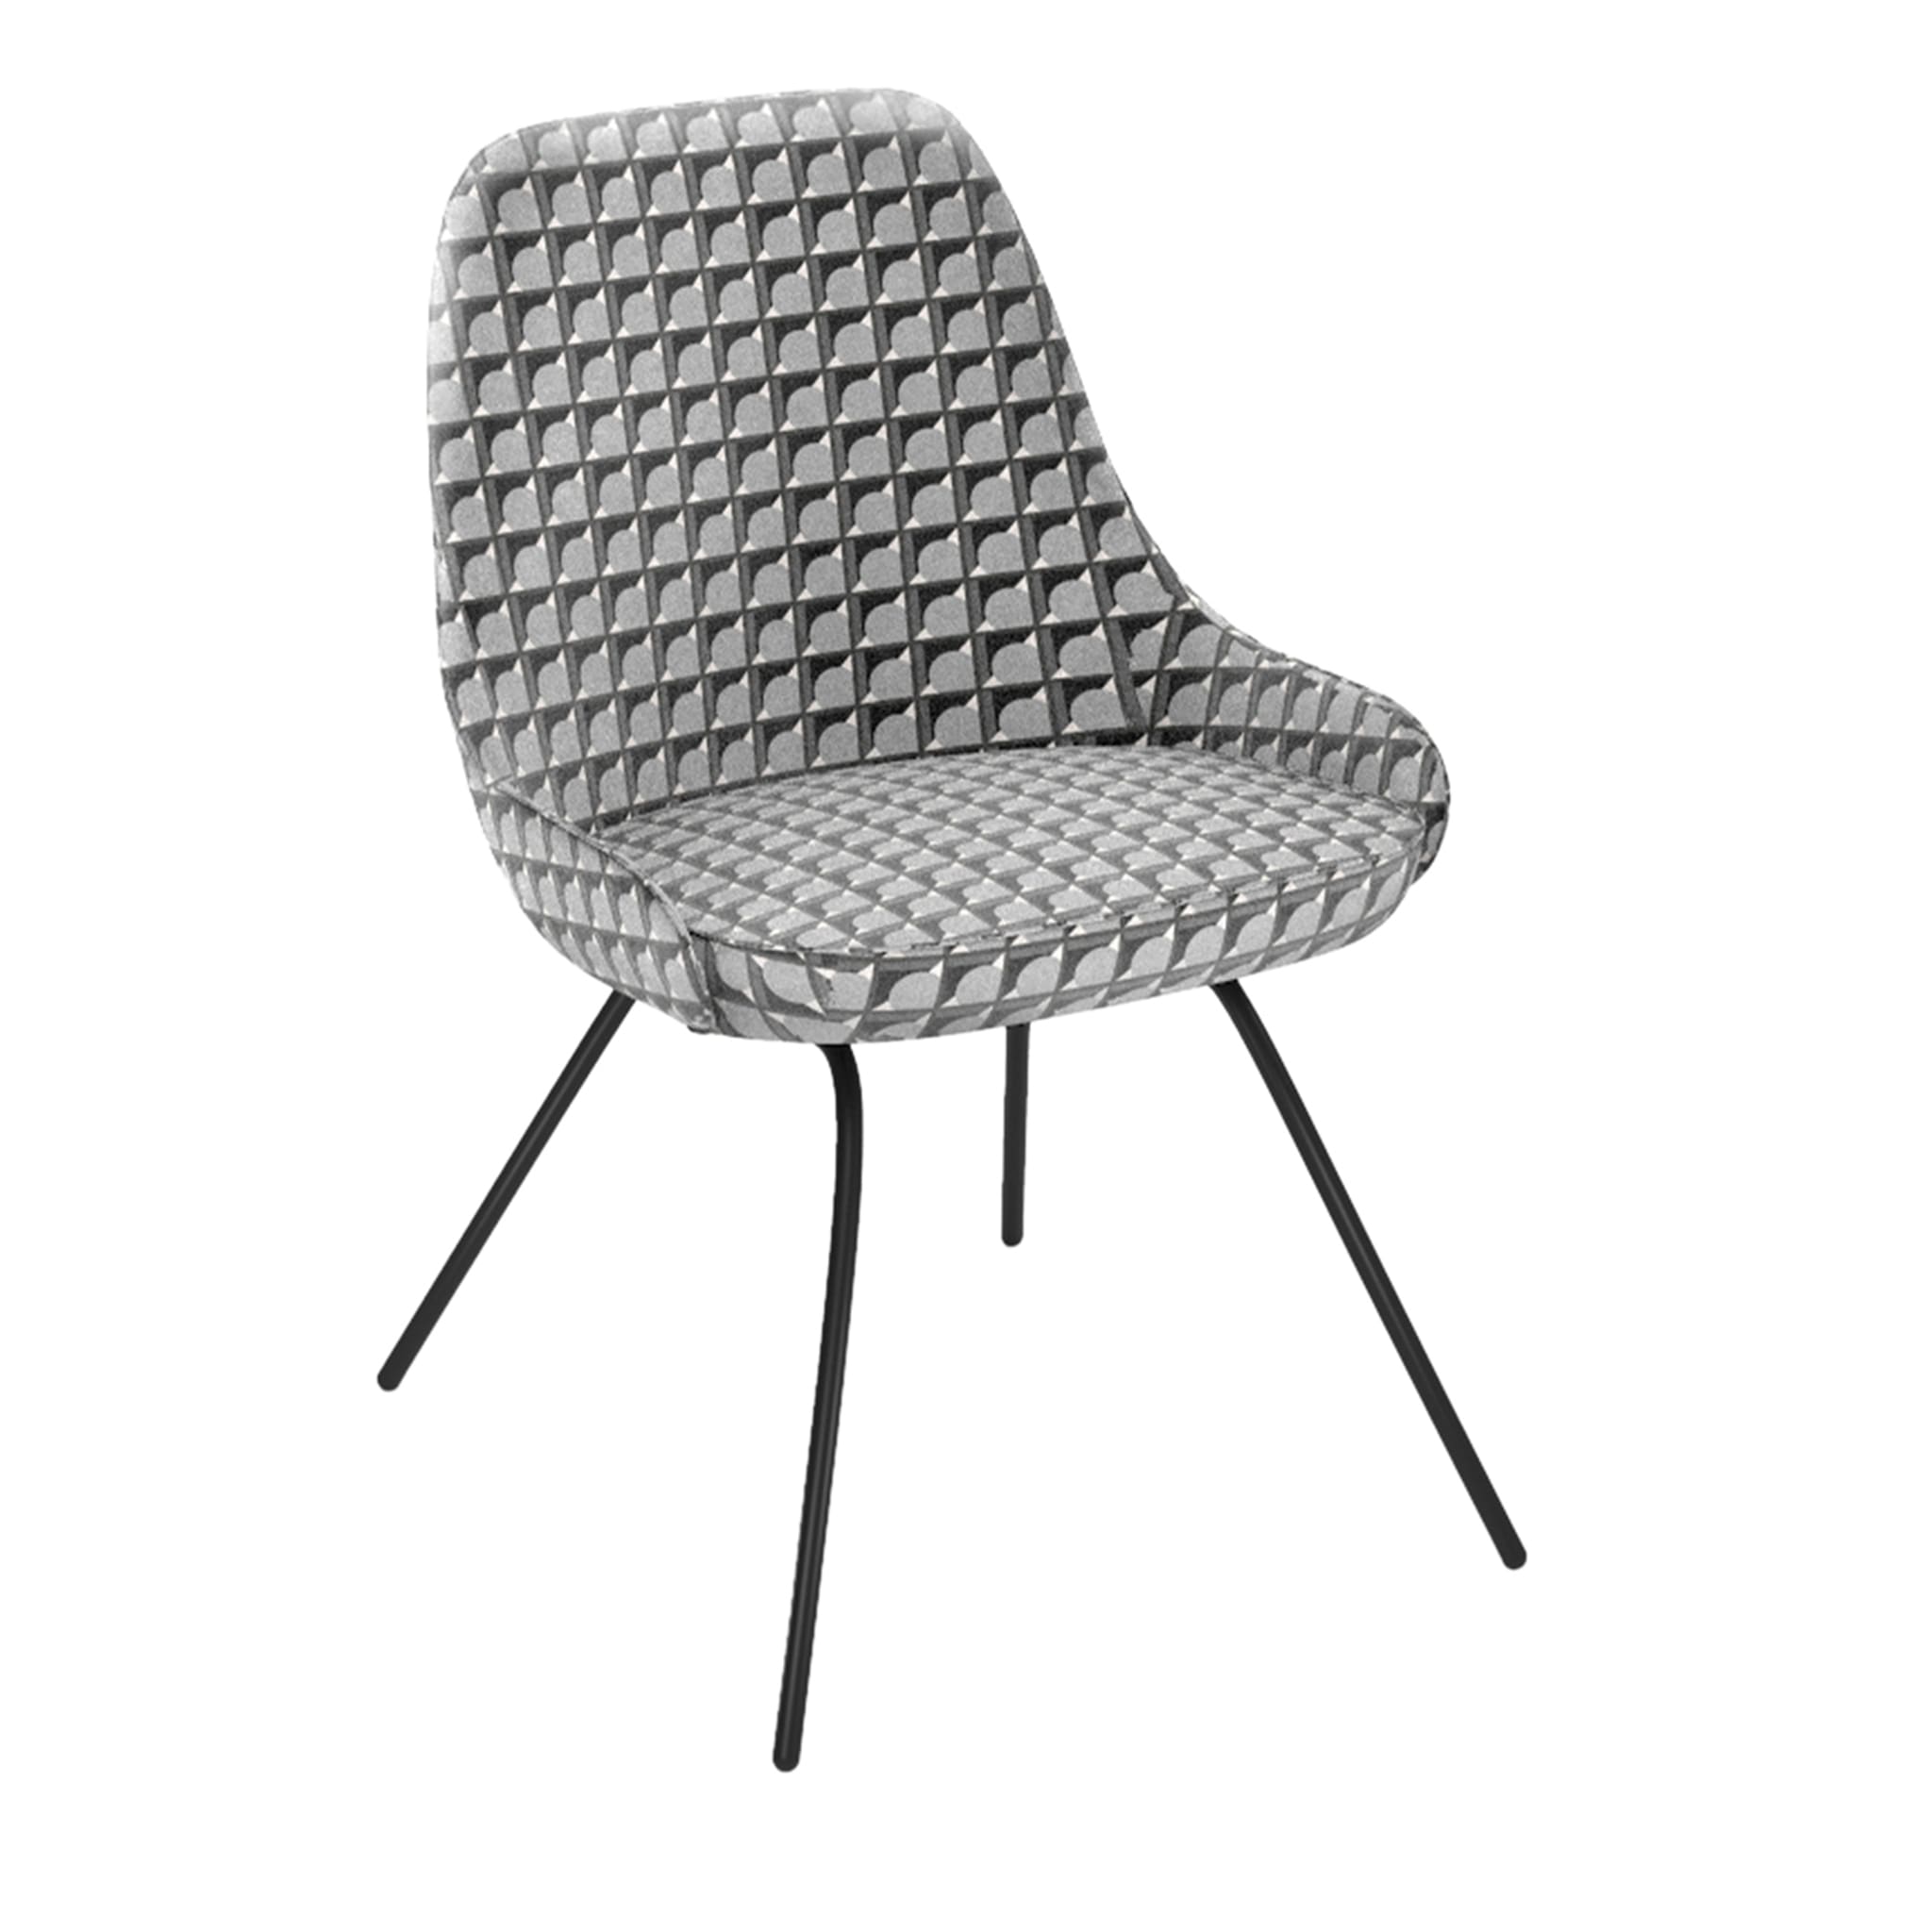 Eyre Patterned Chair - Main view